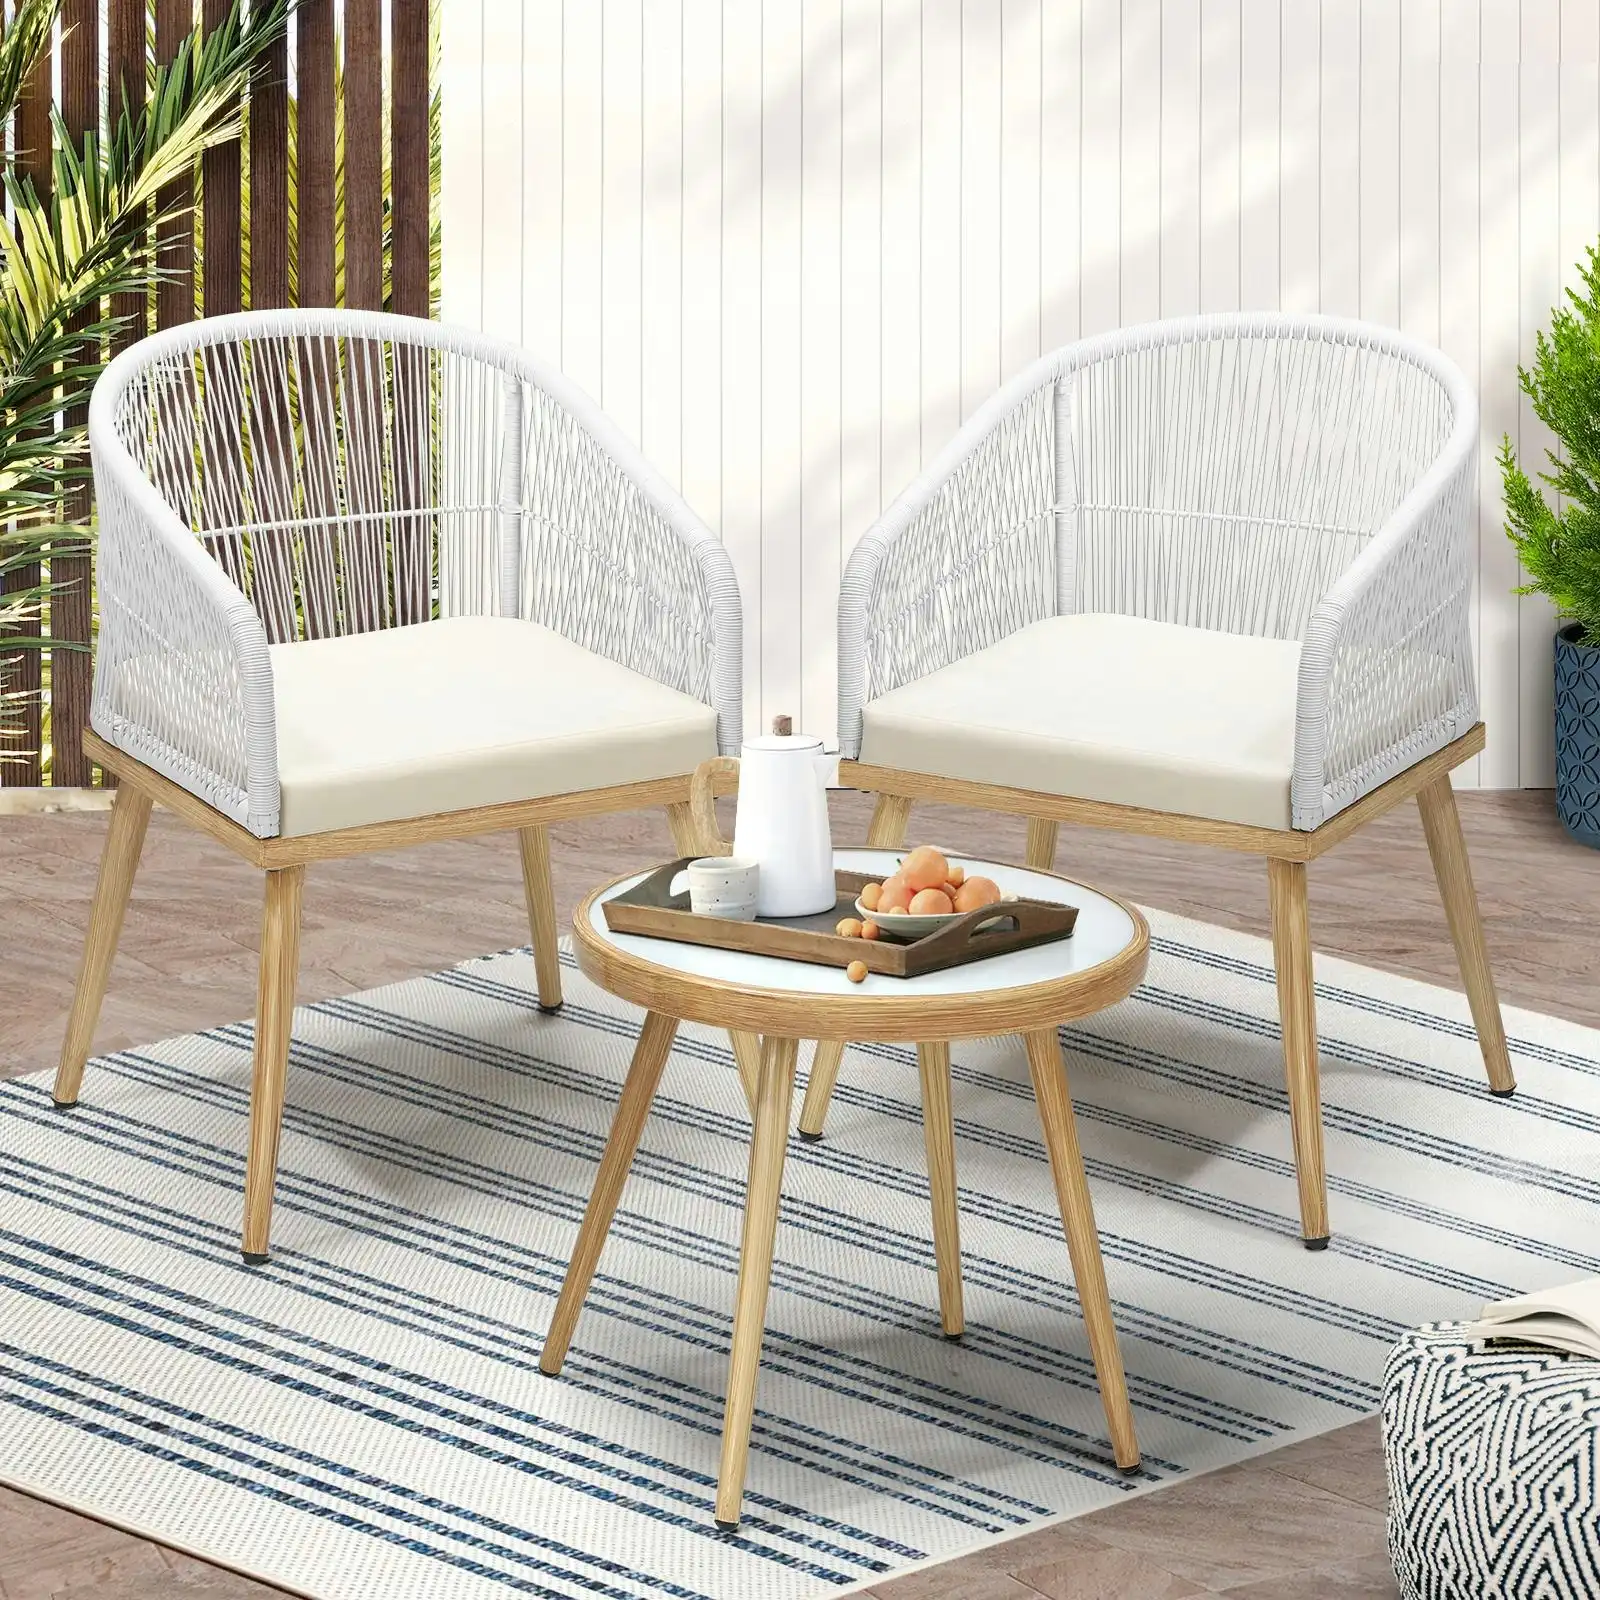 Livsip 3PCS Outdoor Furniture Lounge Setting Dining Table Chair Patio Bistro Set